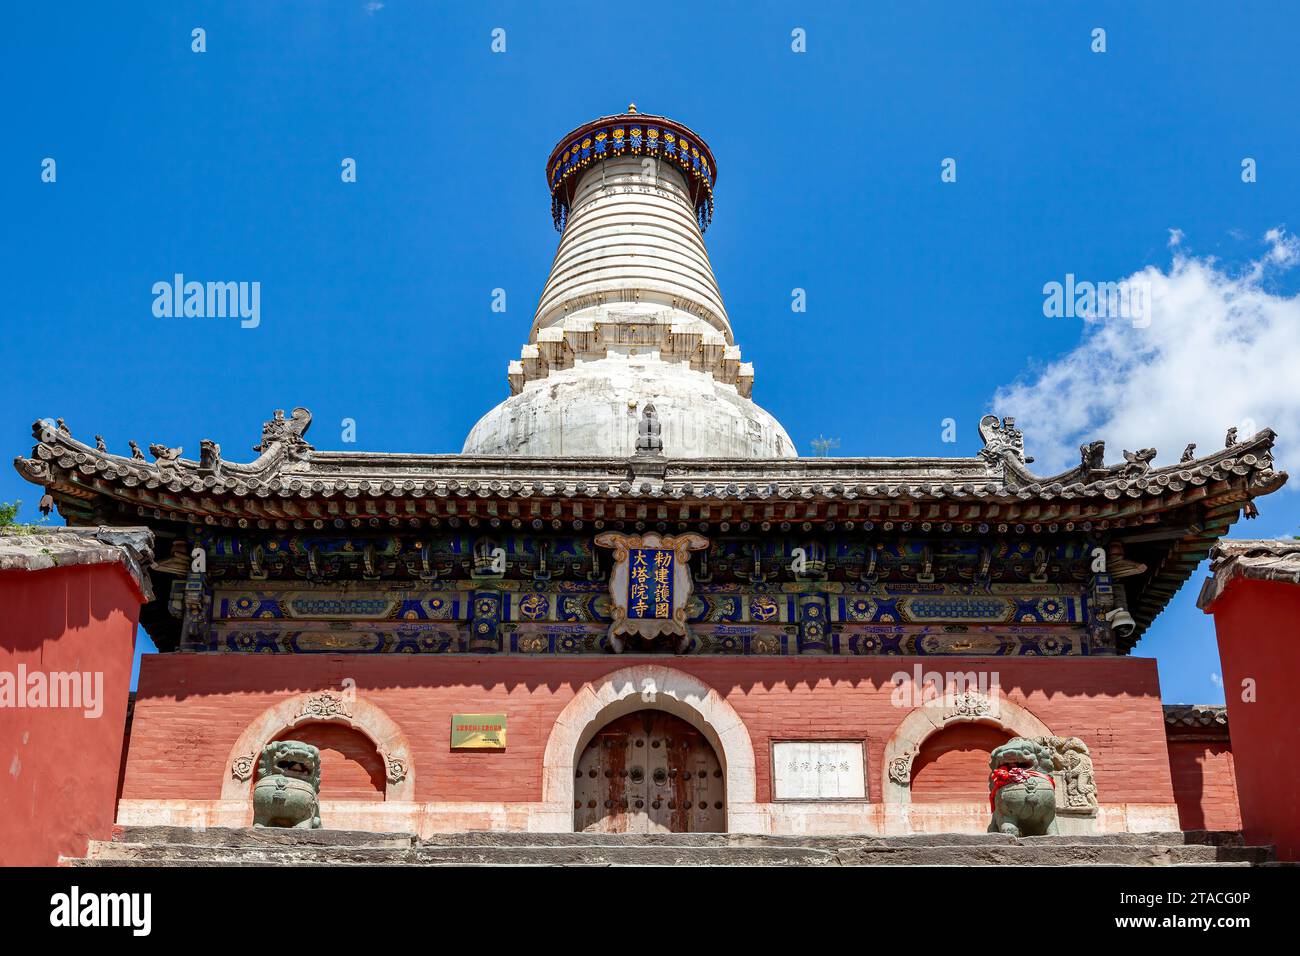 The Temples of Wutai Shan in China Stock Photo